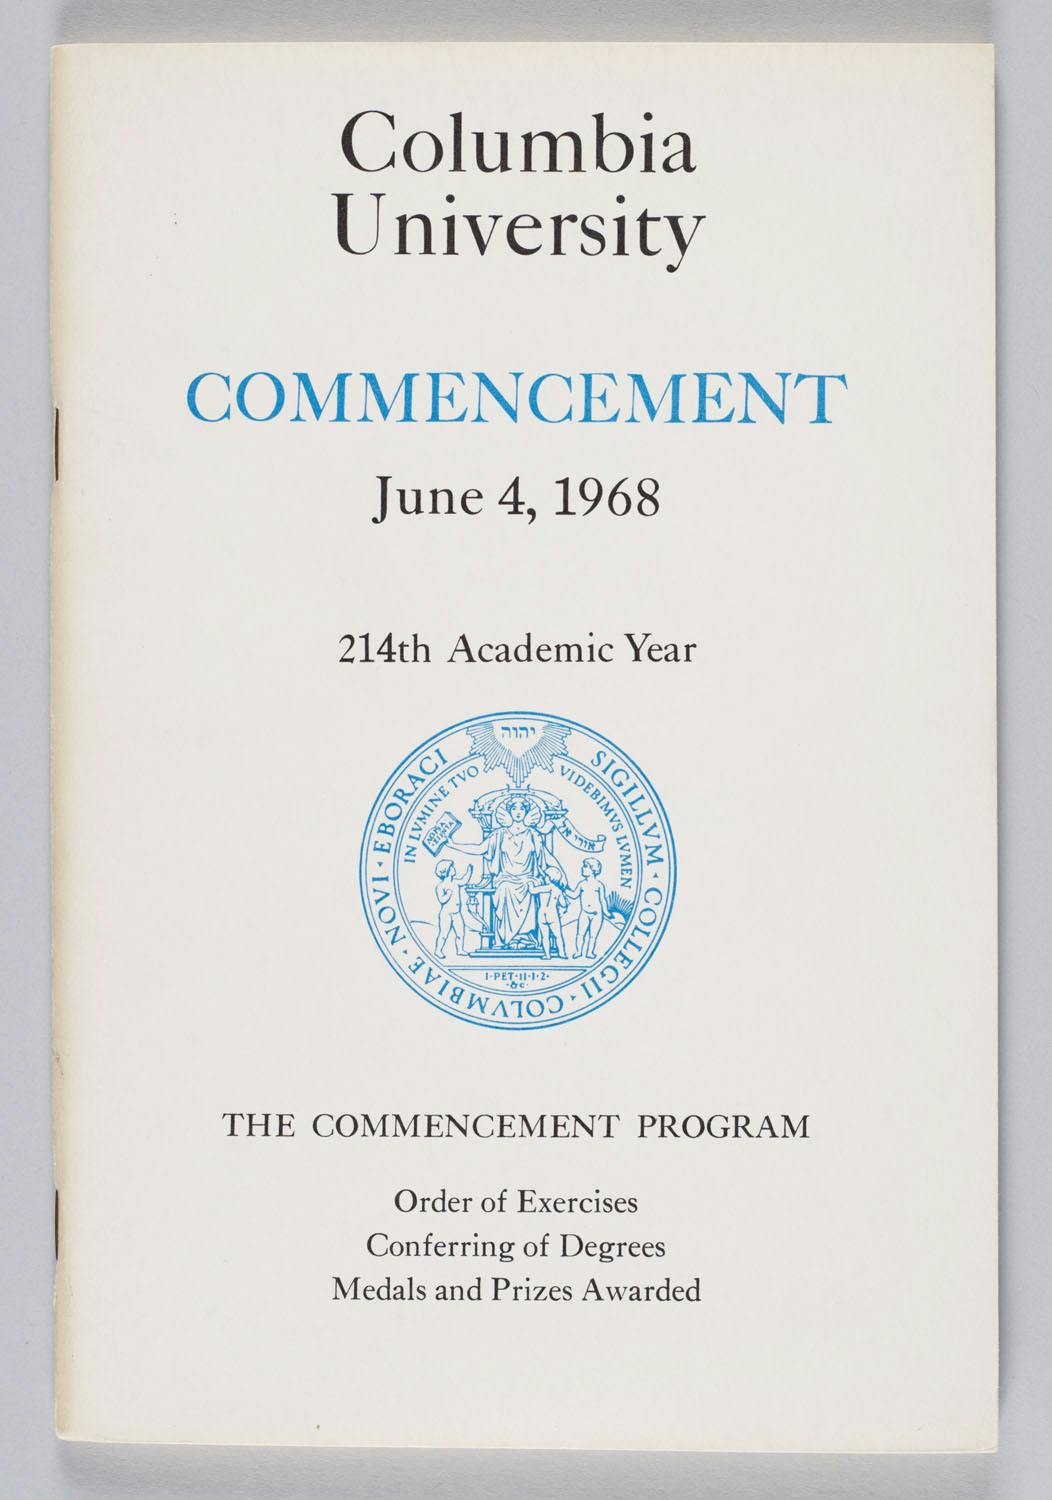 The cover of Columbia's 1968 commencement program